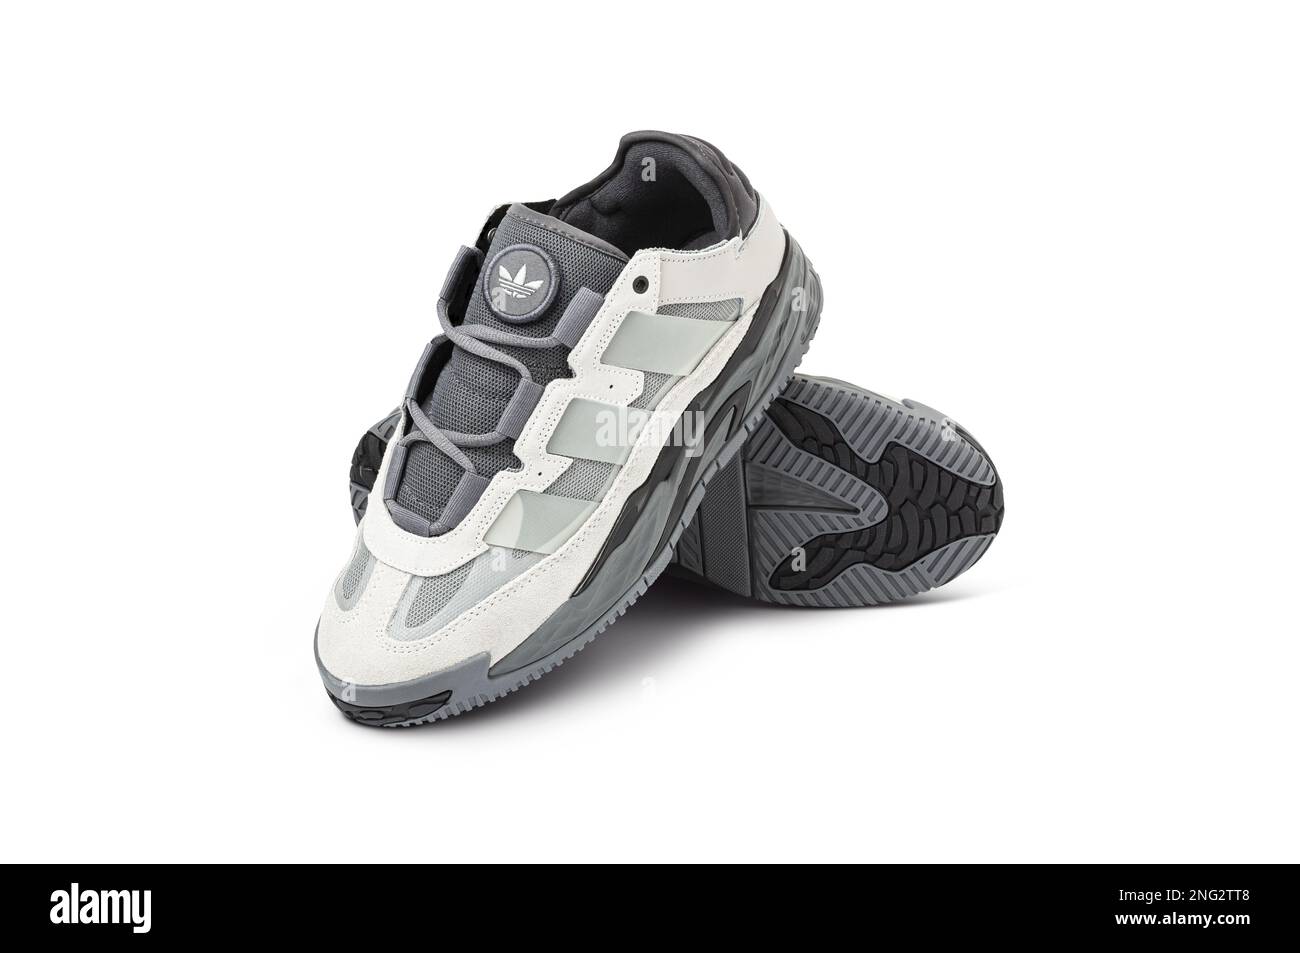 CHISINAU, MOLDOVA - FEBRUARY 12, 2023: Sneakers Adidas Niteball for sports, and for everyday wear in urban and office environments. Futuristic design Stock Photo